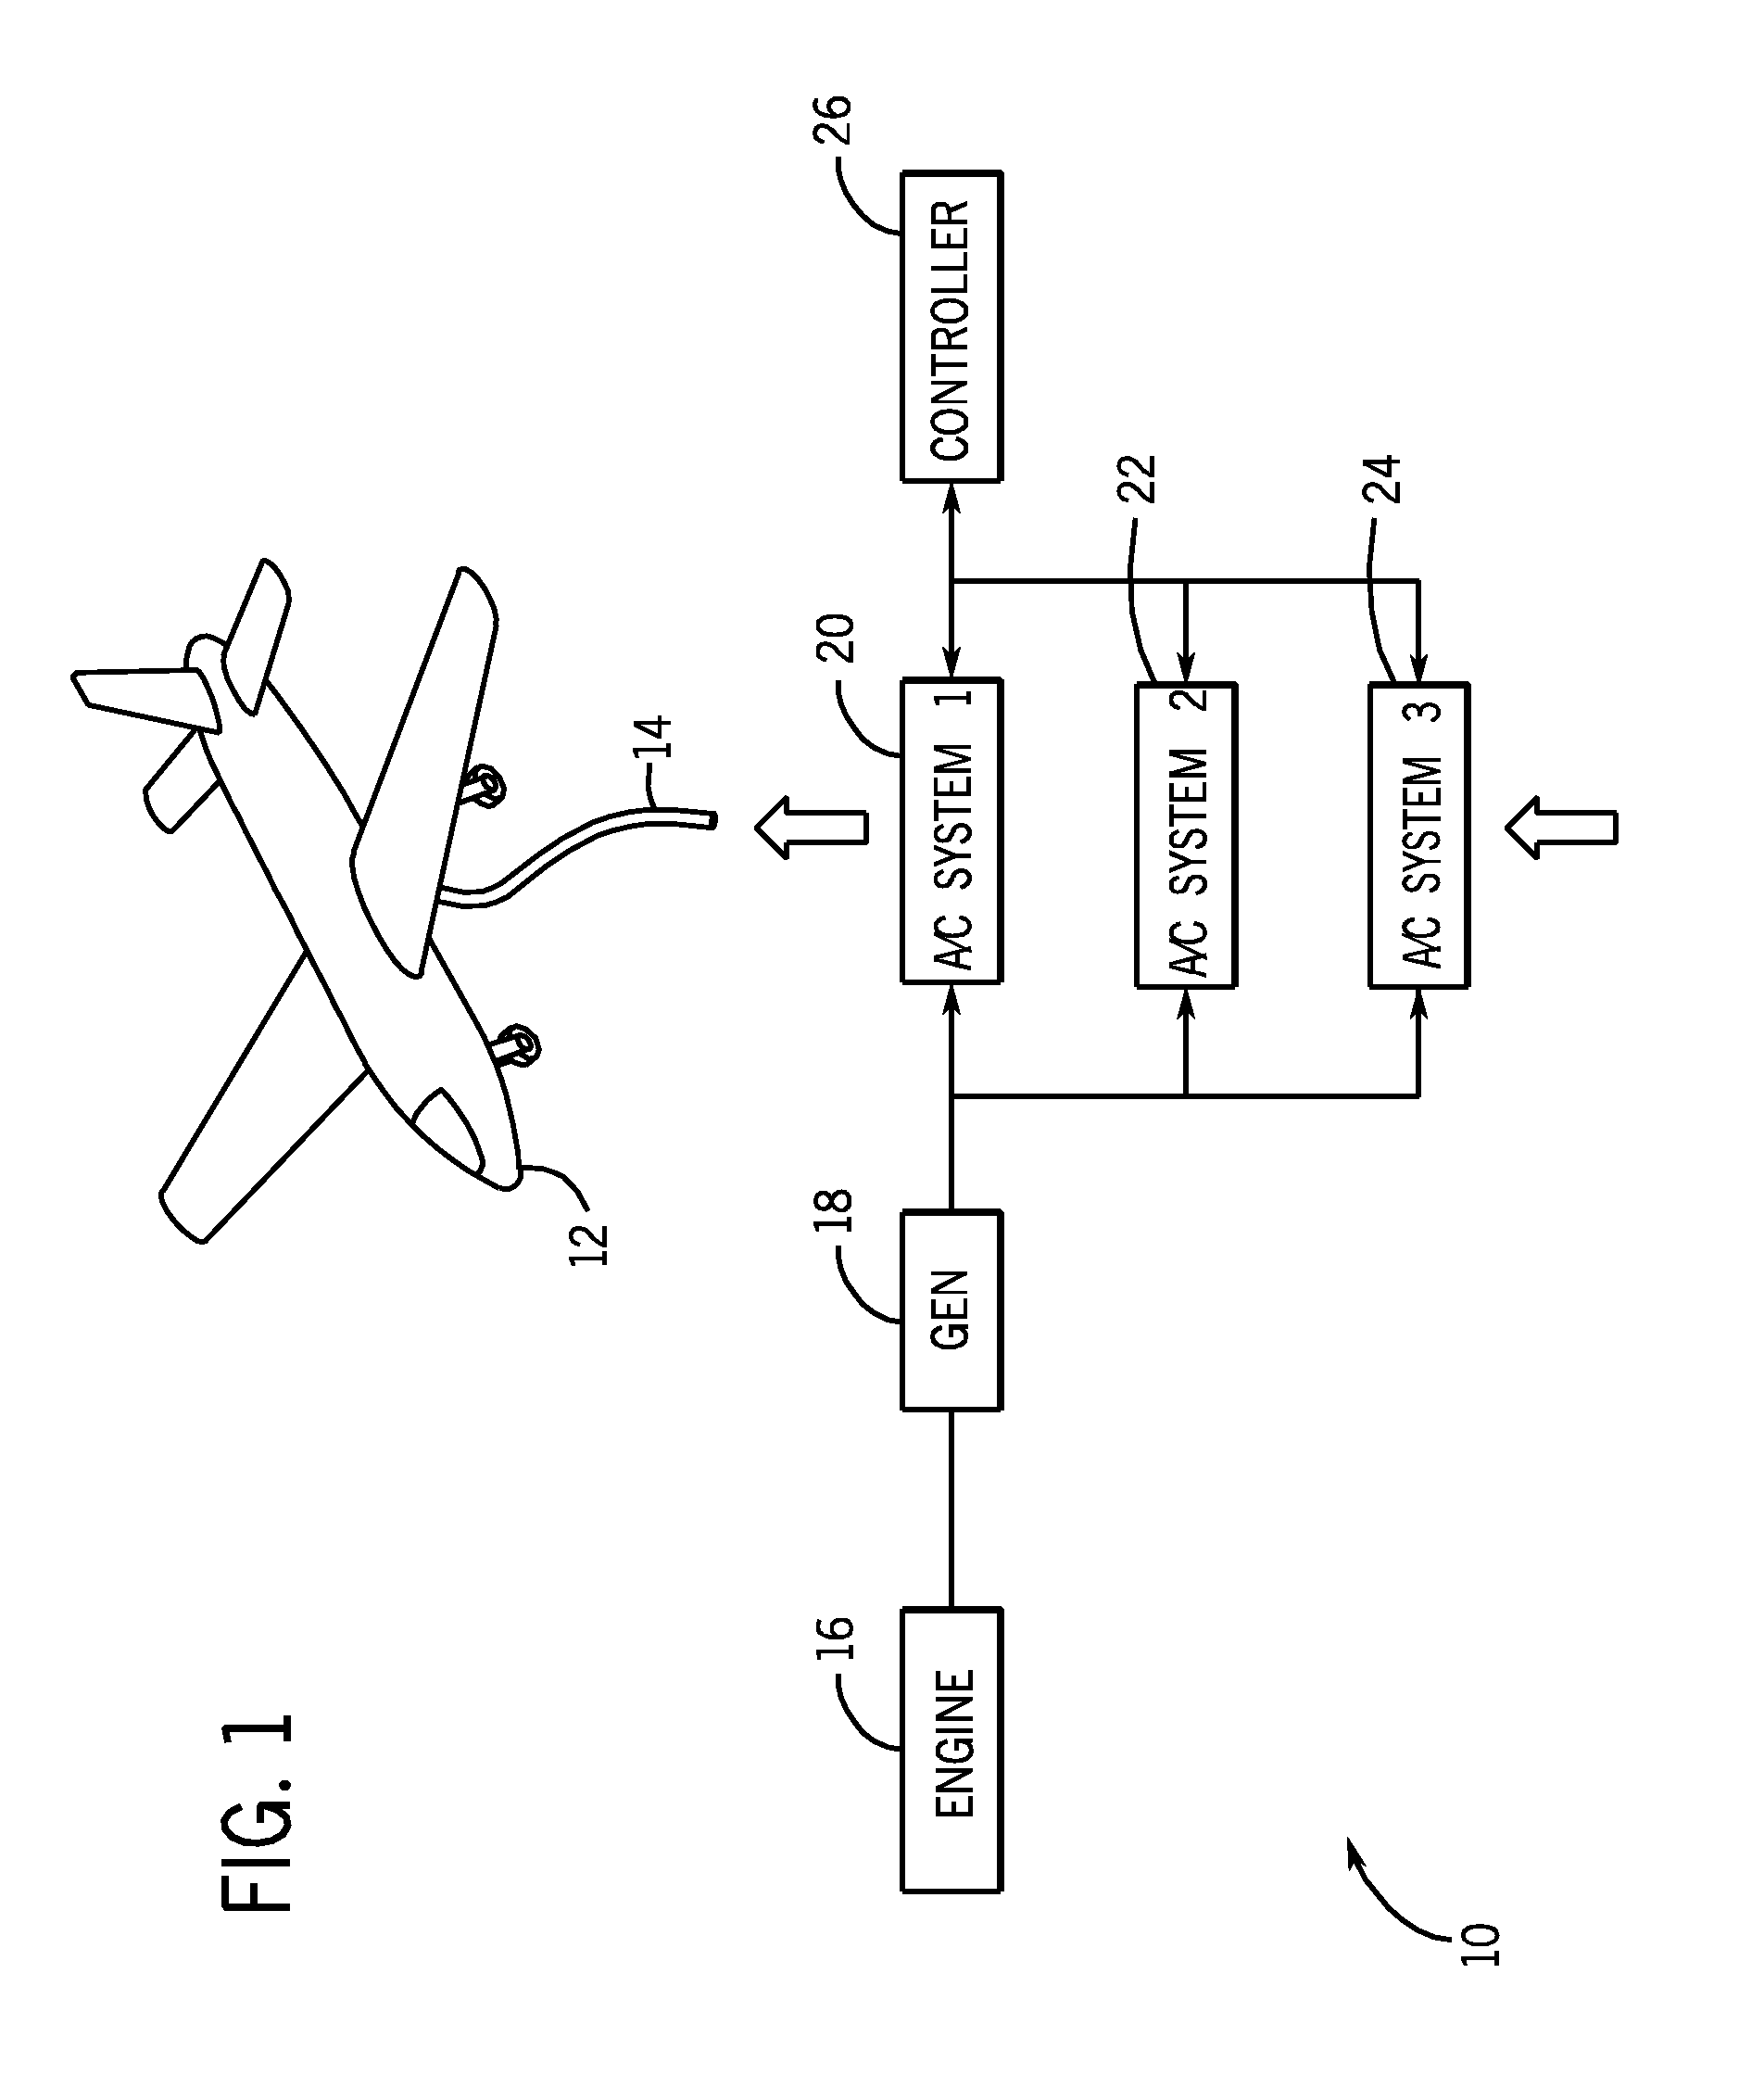 Parked aircraft climate control system and method